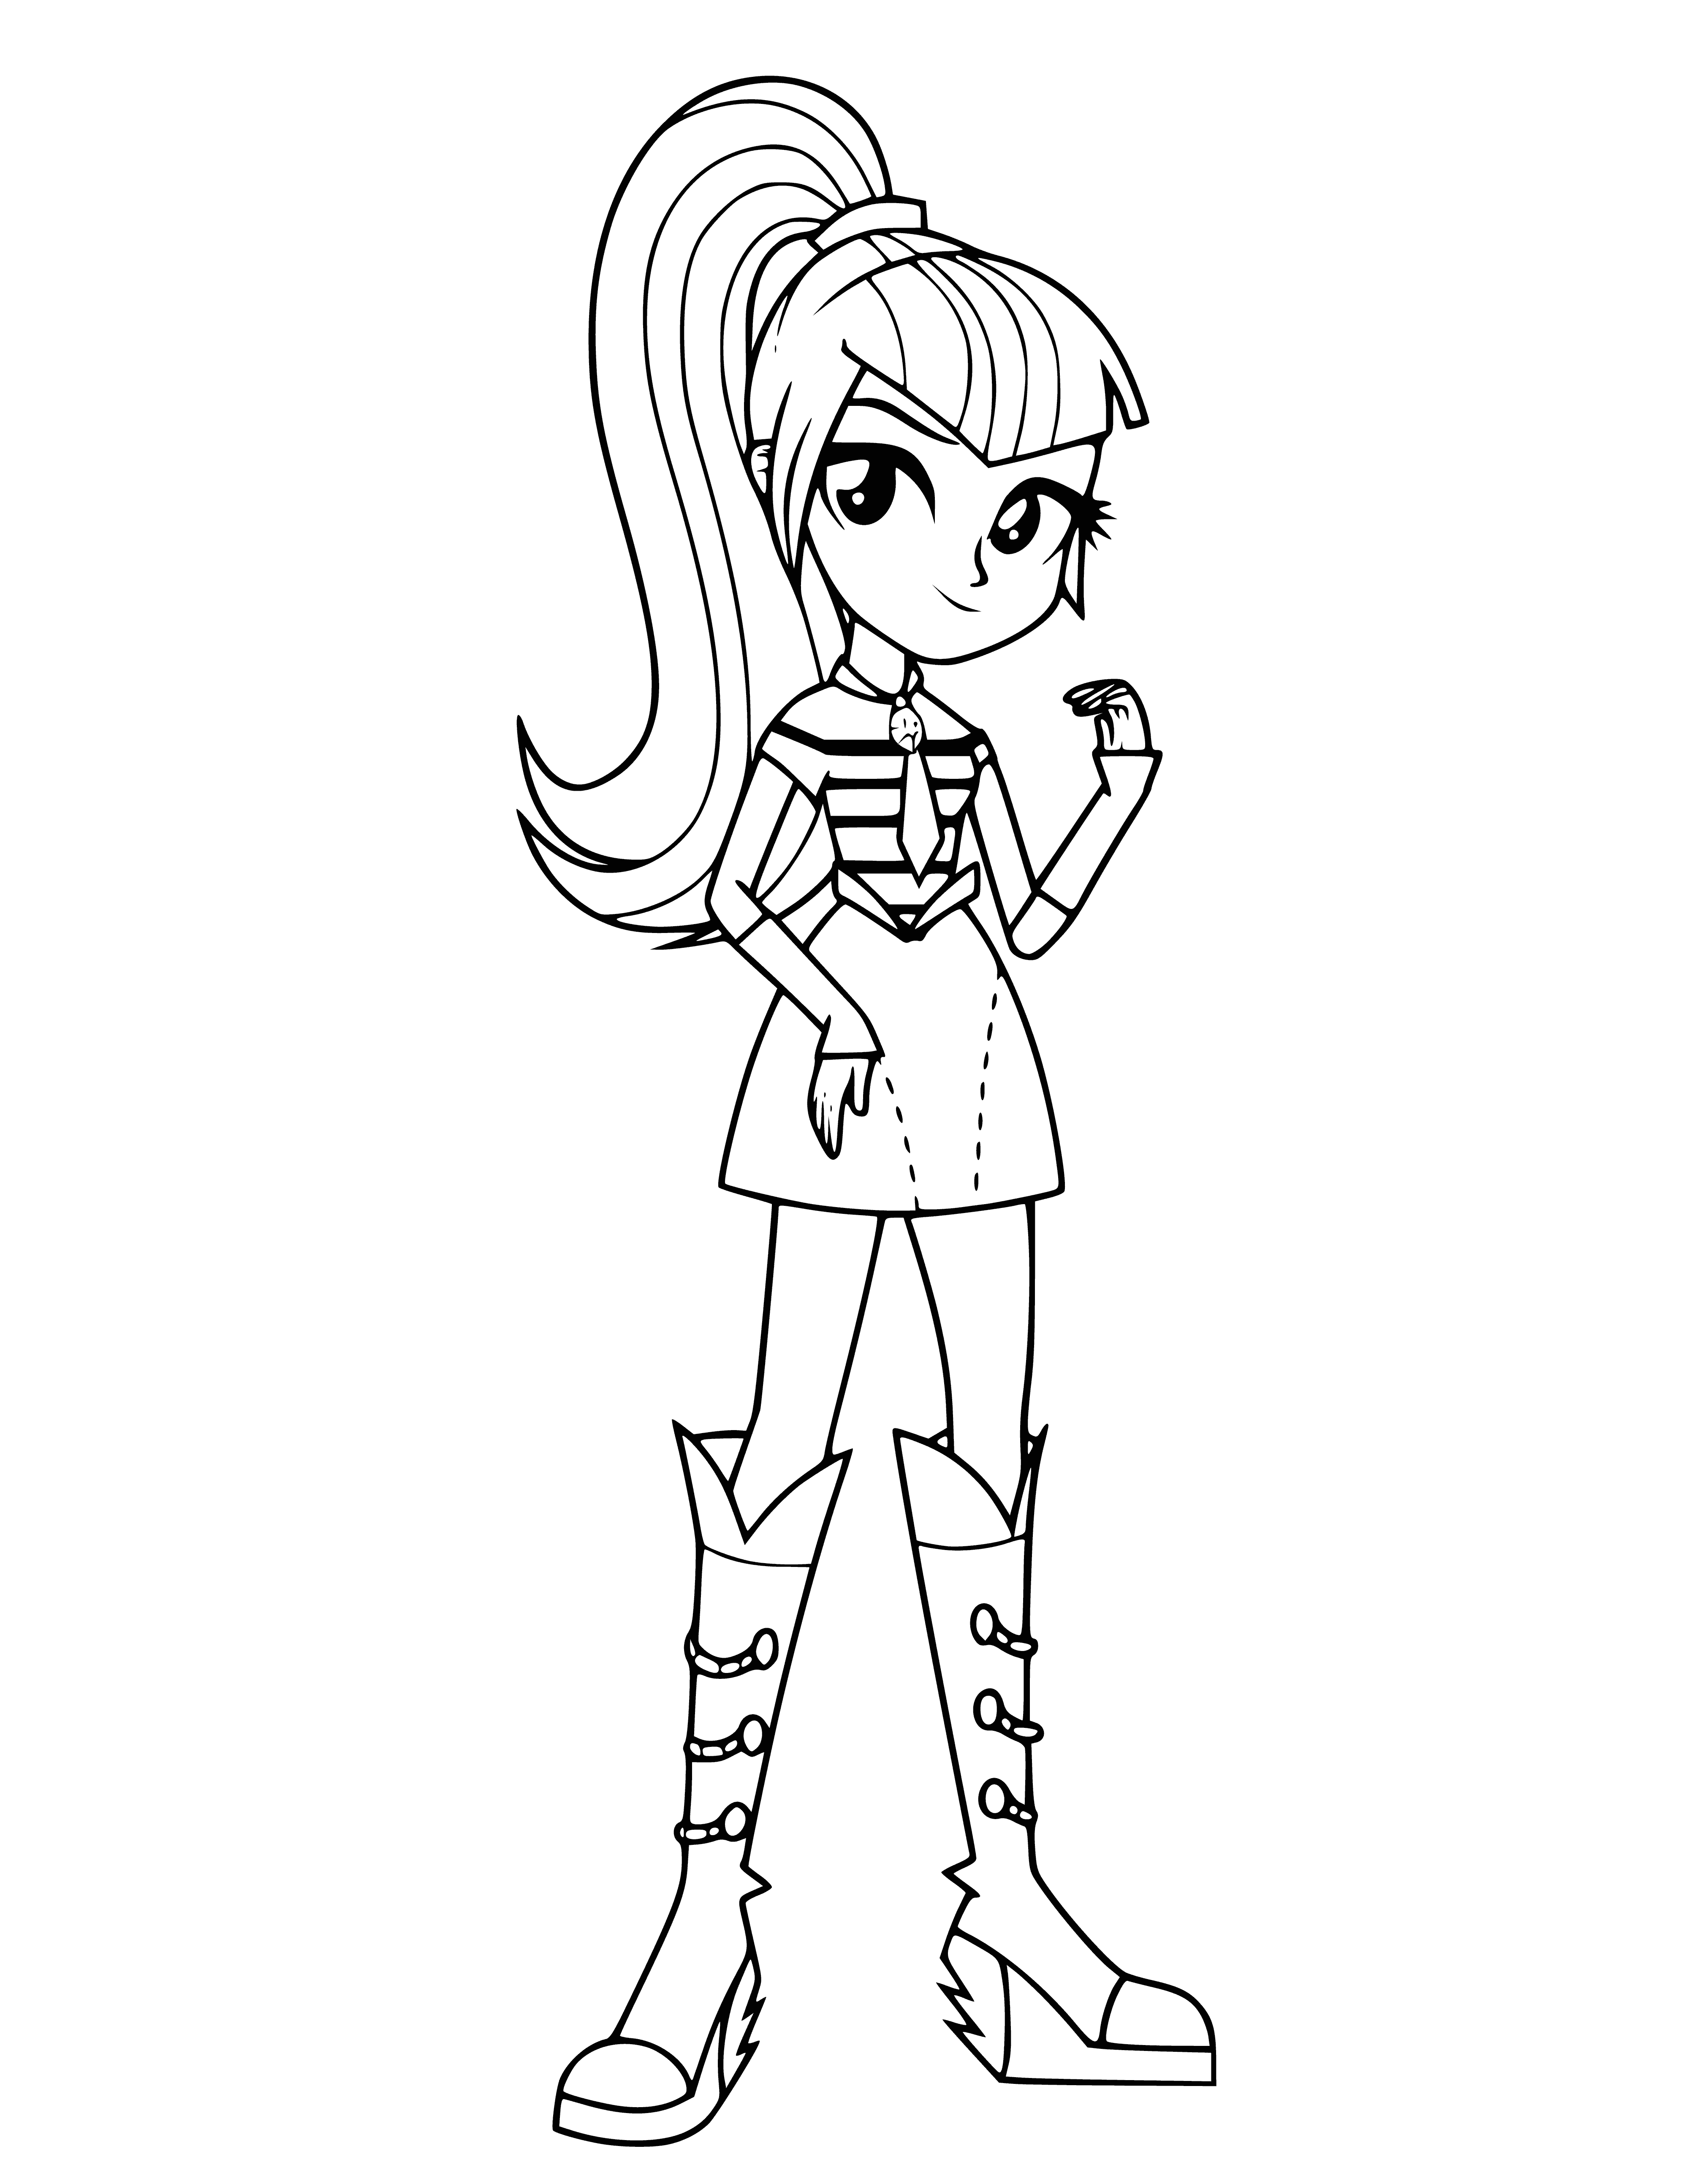 Girl with blue hair, eyes & outfit wearing bracelet, necklace & shoes. #coloringpage